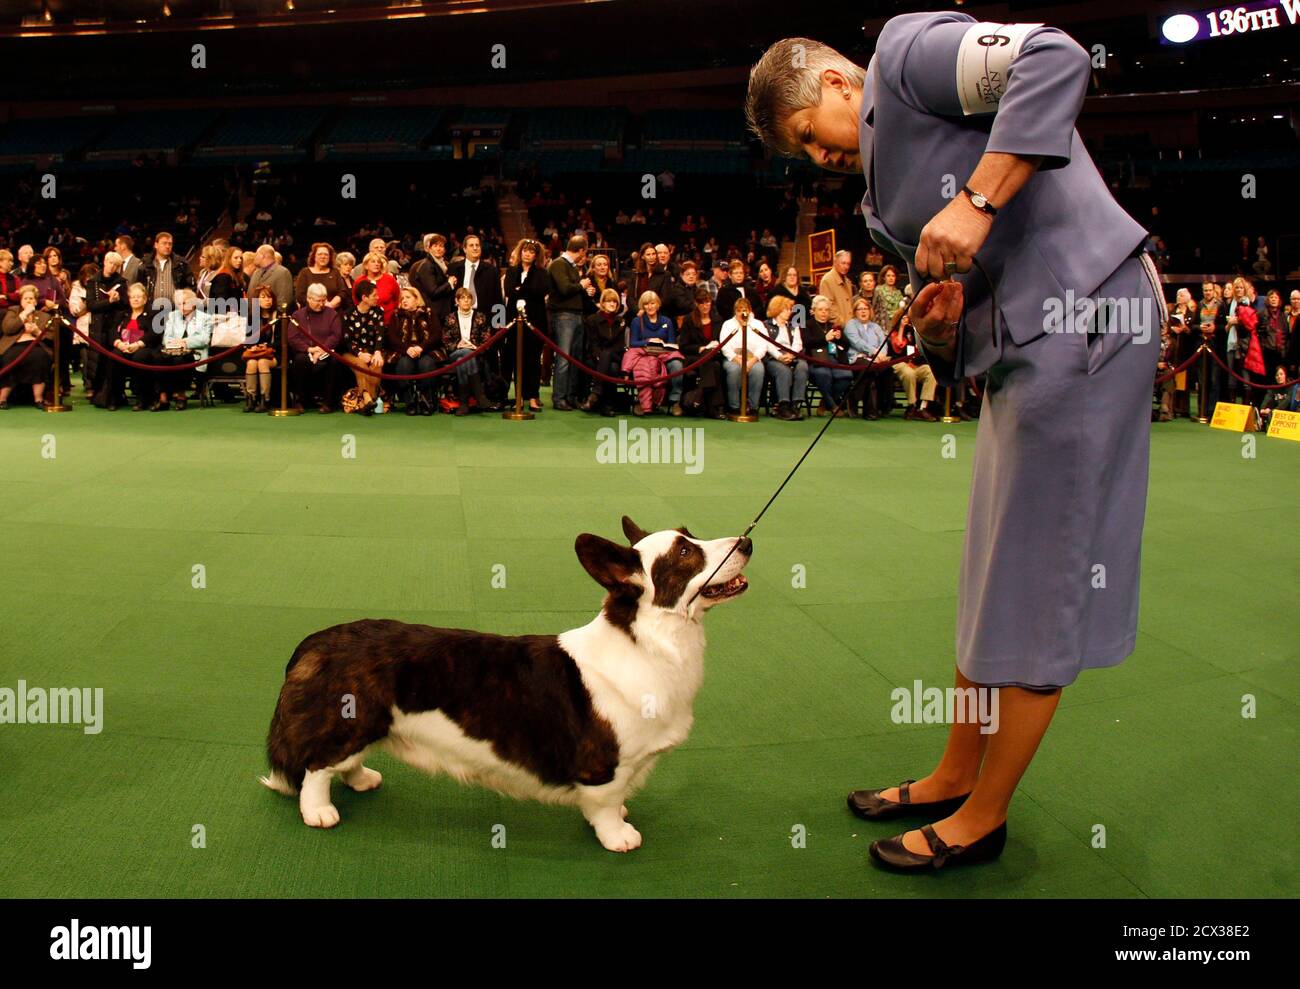 Handler Dixie Rae shows Cardigan Welsh Corgi Myste Baledwr Free to Disagree  during the 136th Westminster kennel Club Dog Show in New York's Madison  Square Garden, February 13, 2012. REUTERS/Mike Segar (UNITED